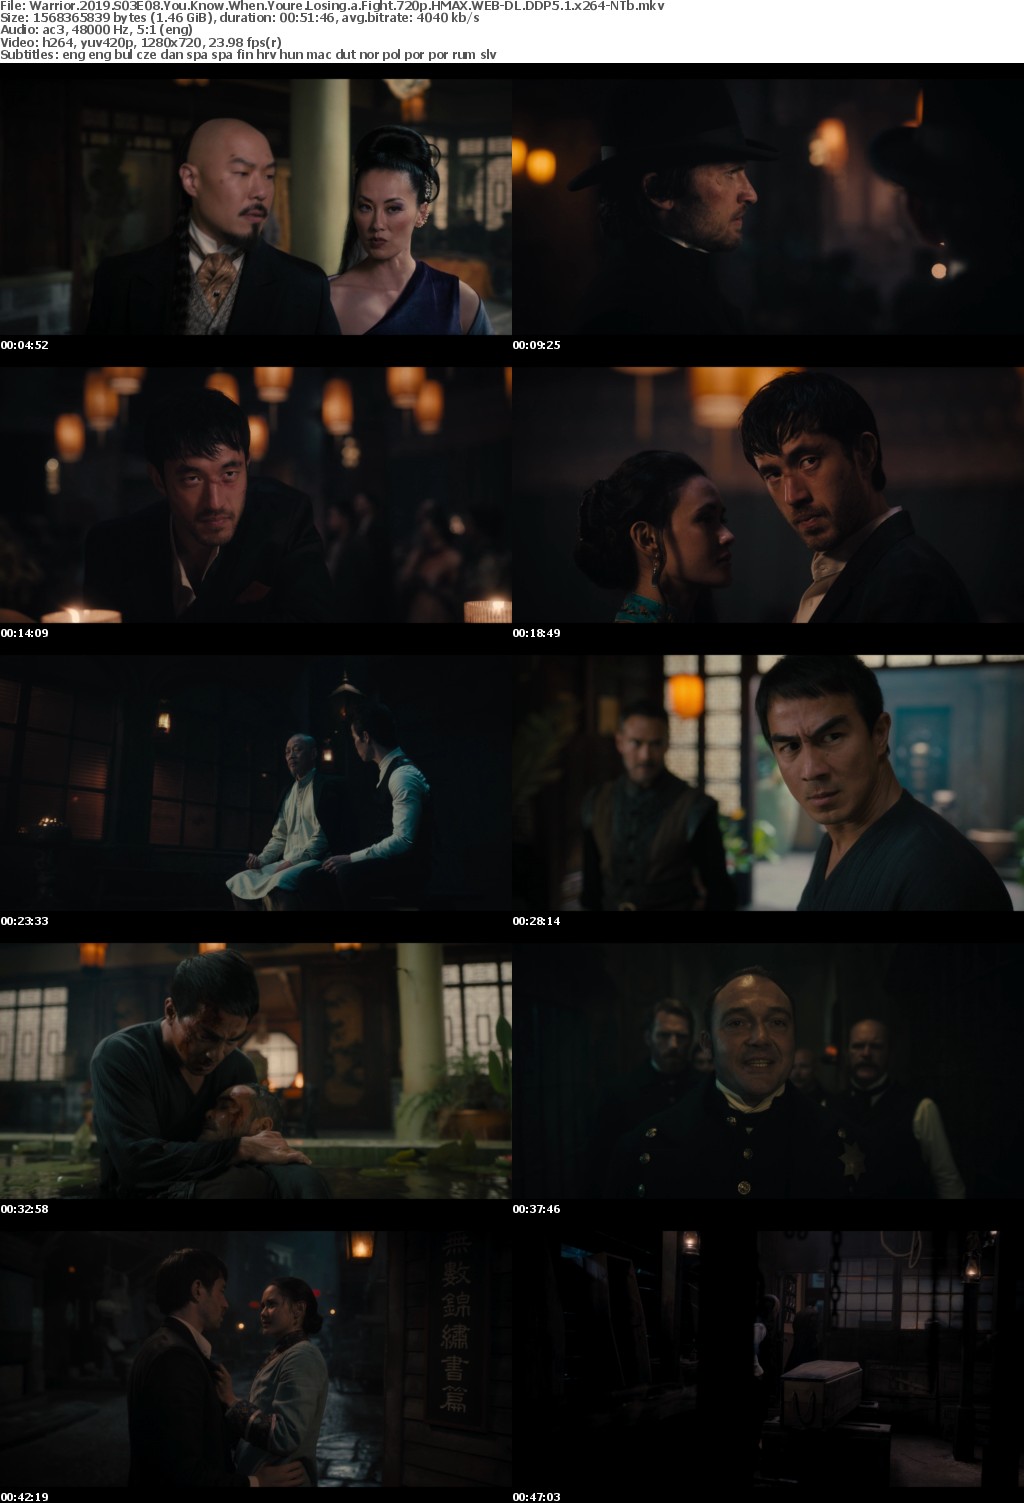 Warrior 2019 S03E08 You Know When Youre Losing a Fight 720p HMAX WEB-DL DDP5 1 x264-NTb